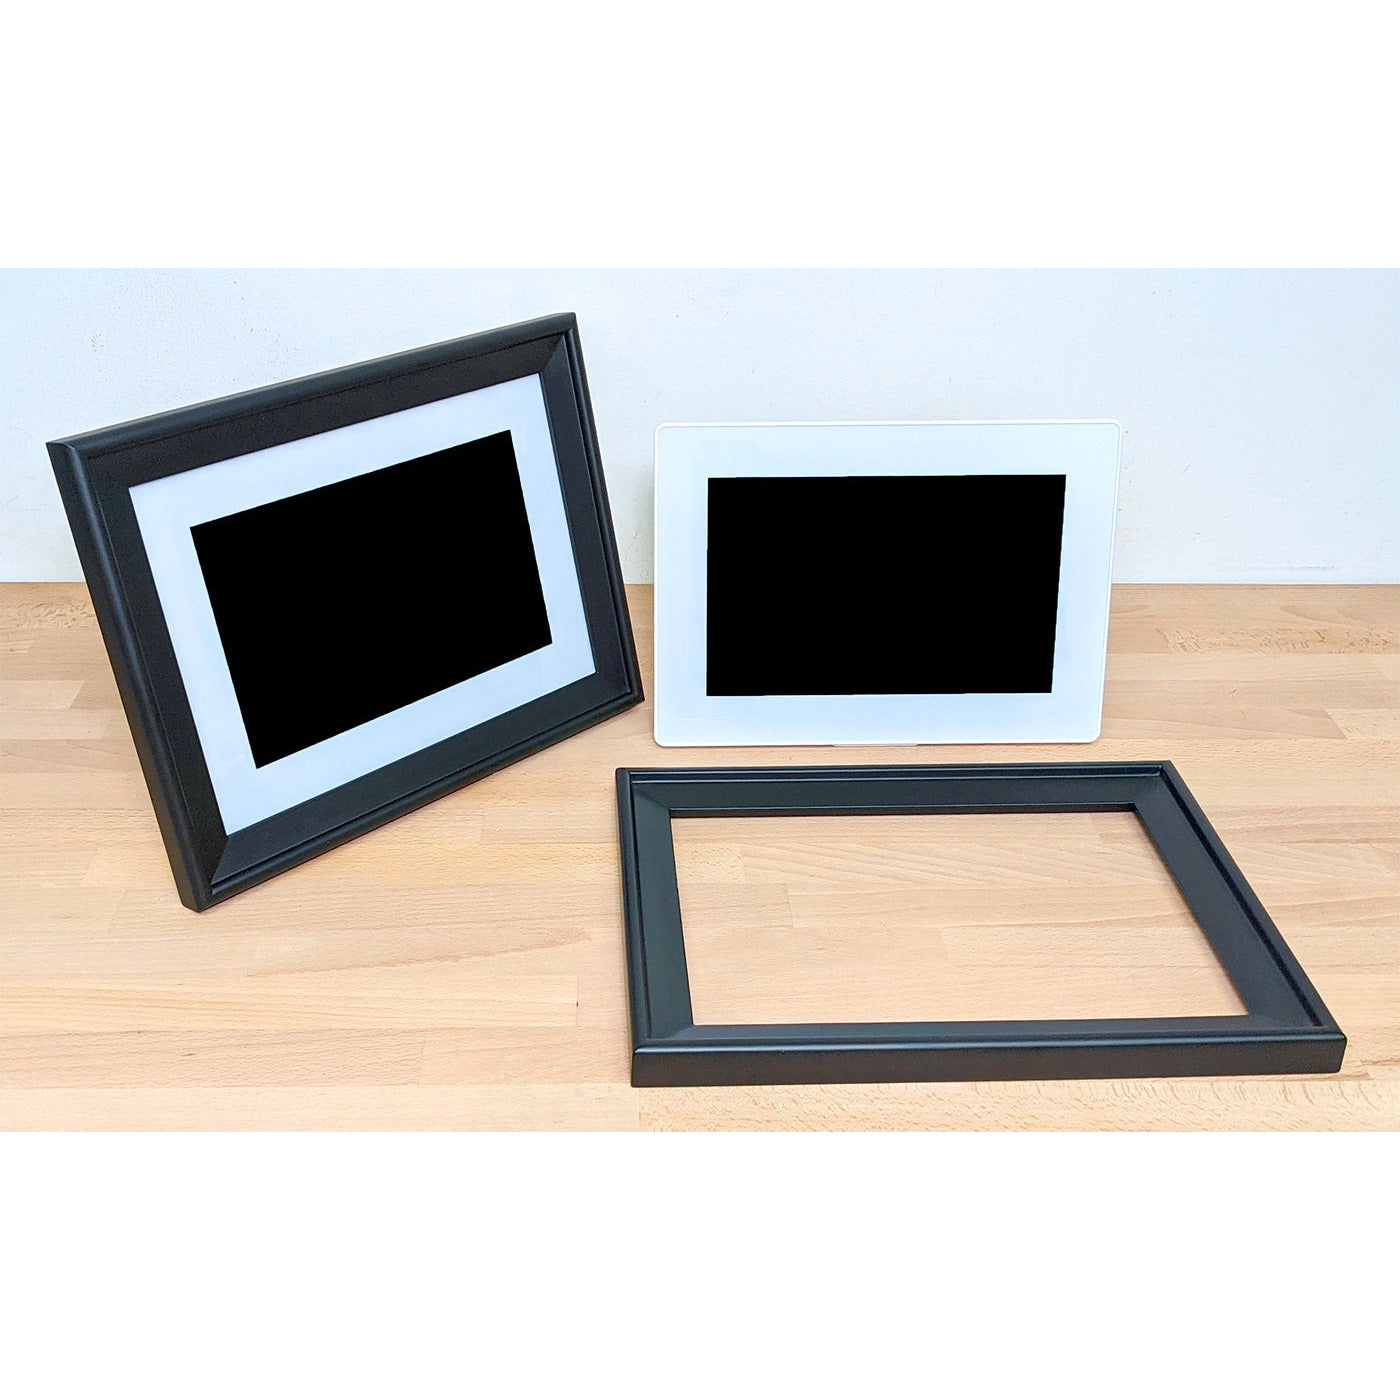 PhotoSpring 10 Premium (PSG-101) Replacement Frame Moulding - FRAME ONLY